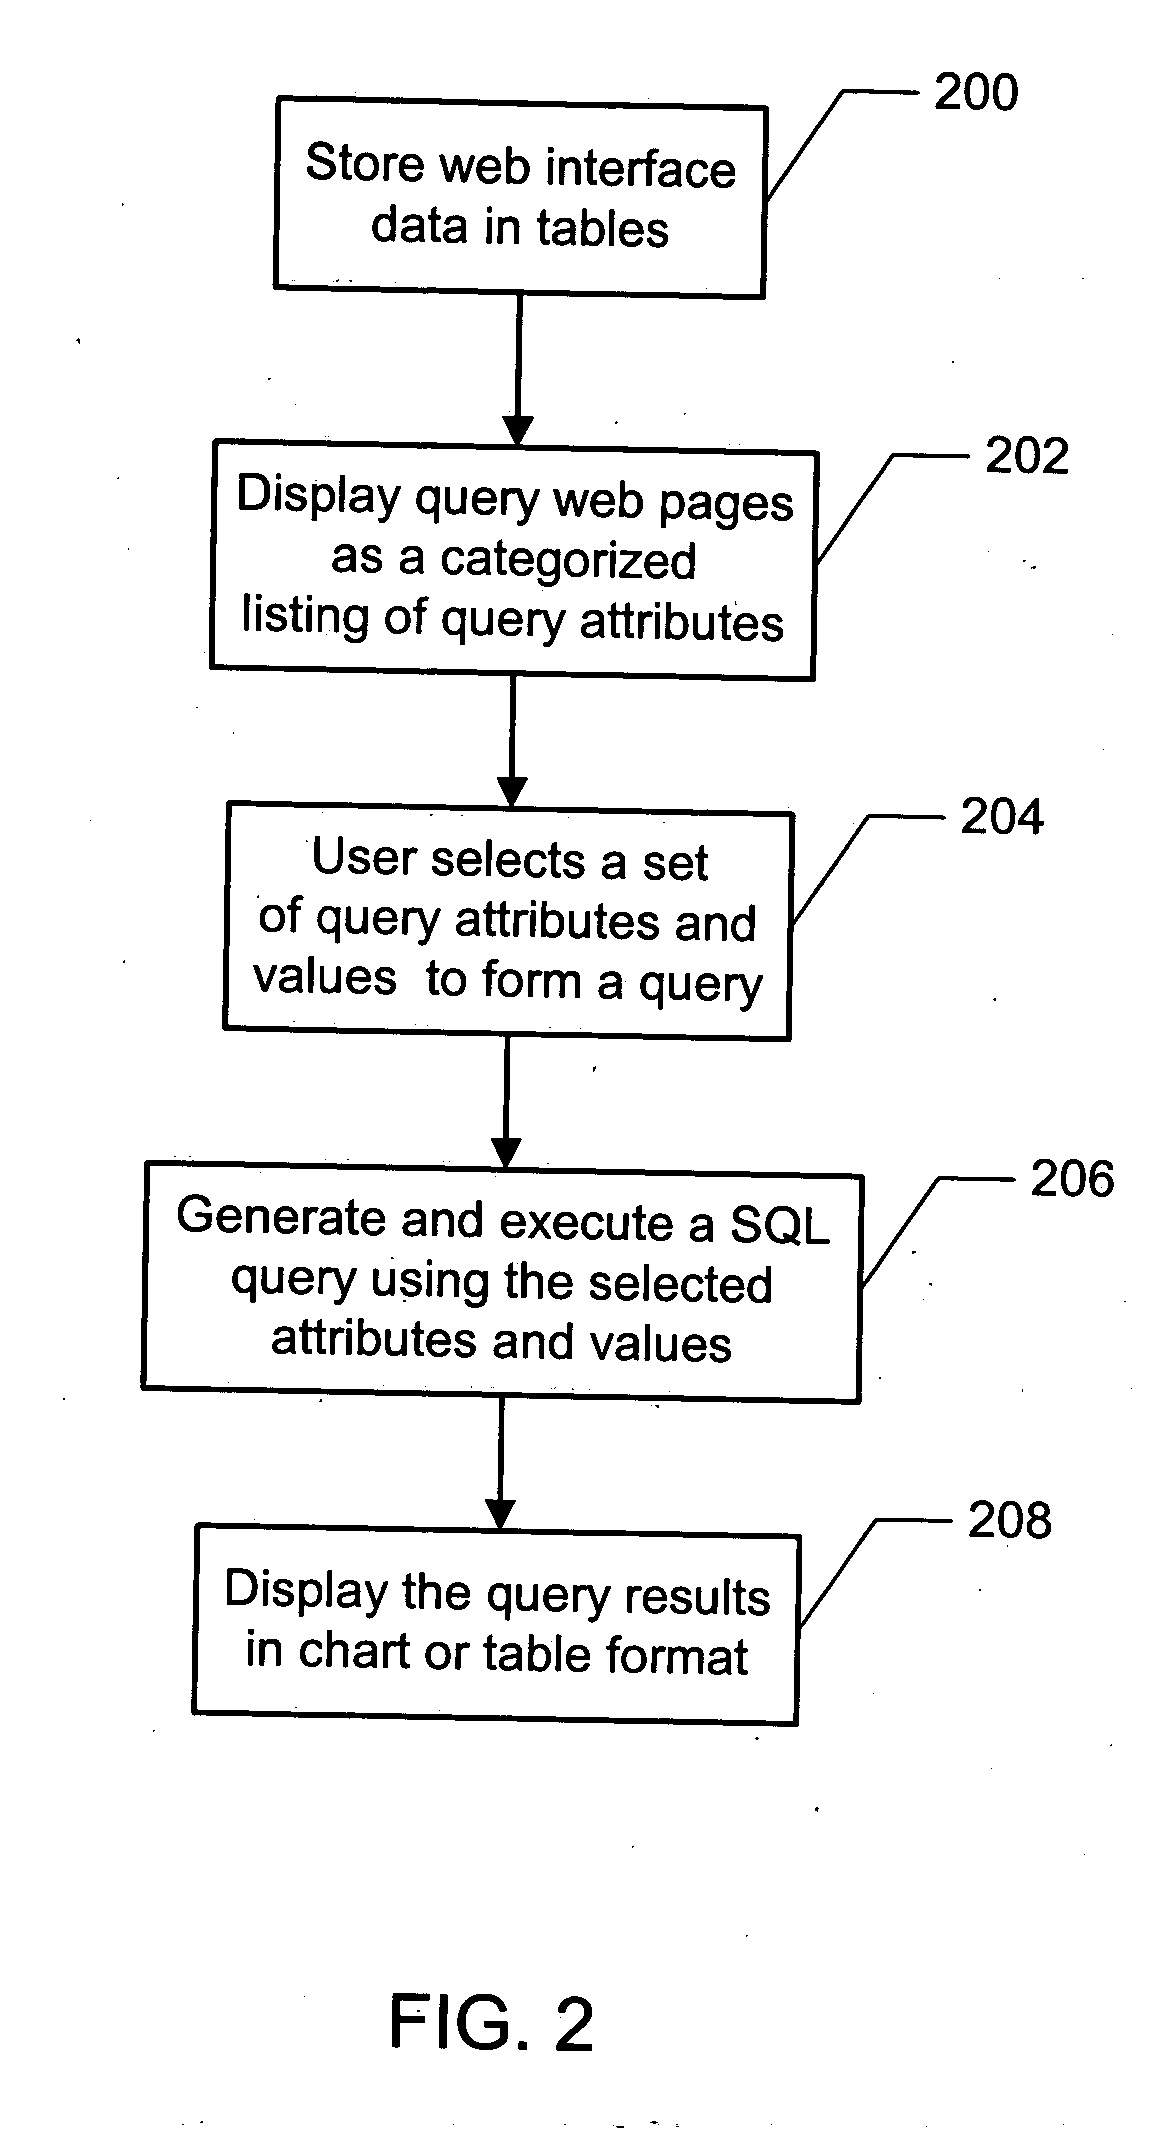 Dynamic graphical user interface and query logic SQL generator used for developing Web-based database applications